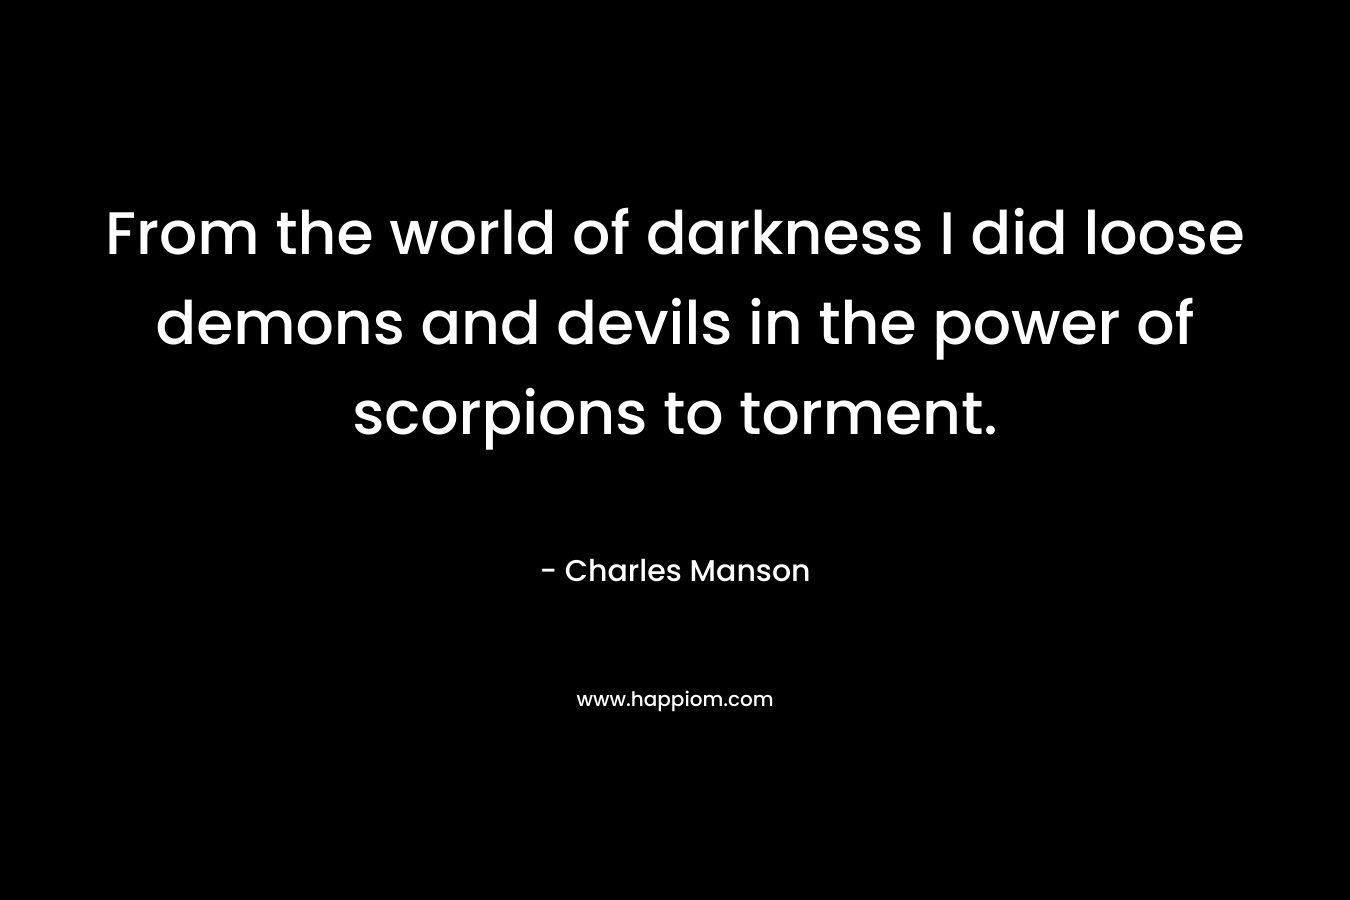 From the world of darkness I did loose demons and devils in the power of scorpions to torment. – Charles Manson